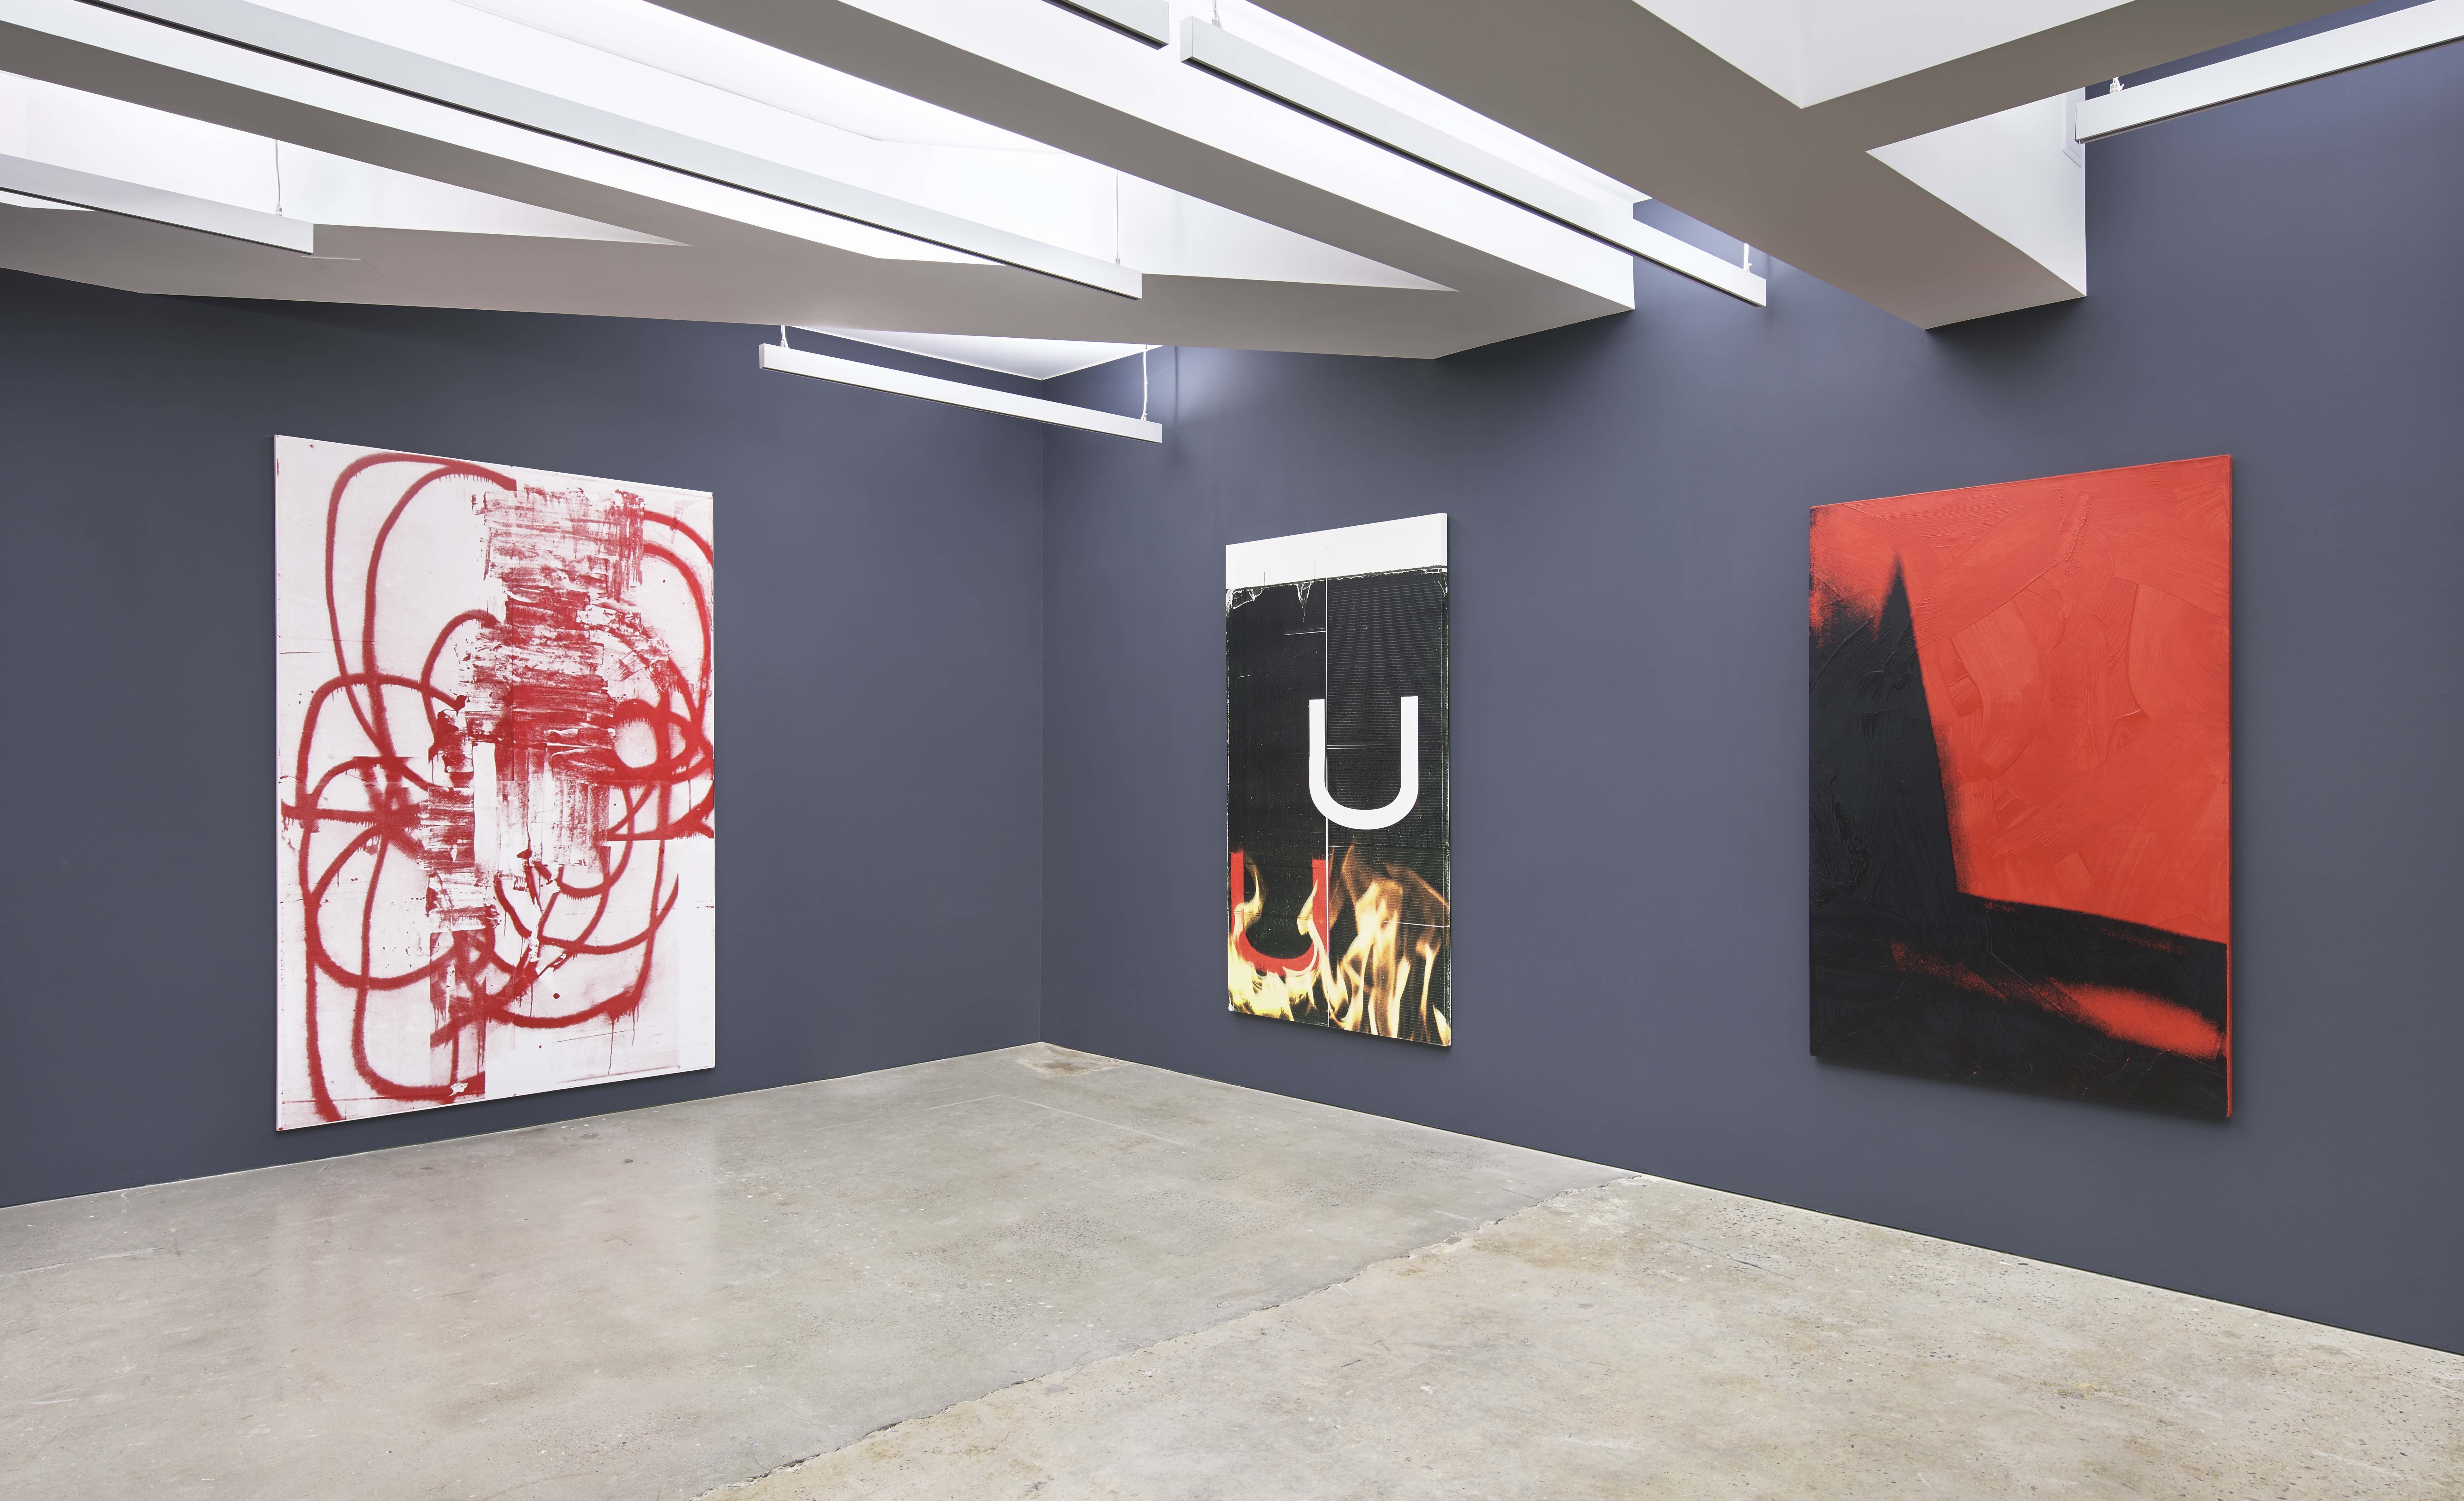 Installation view at Nahmad Contemporary